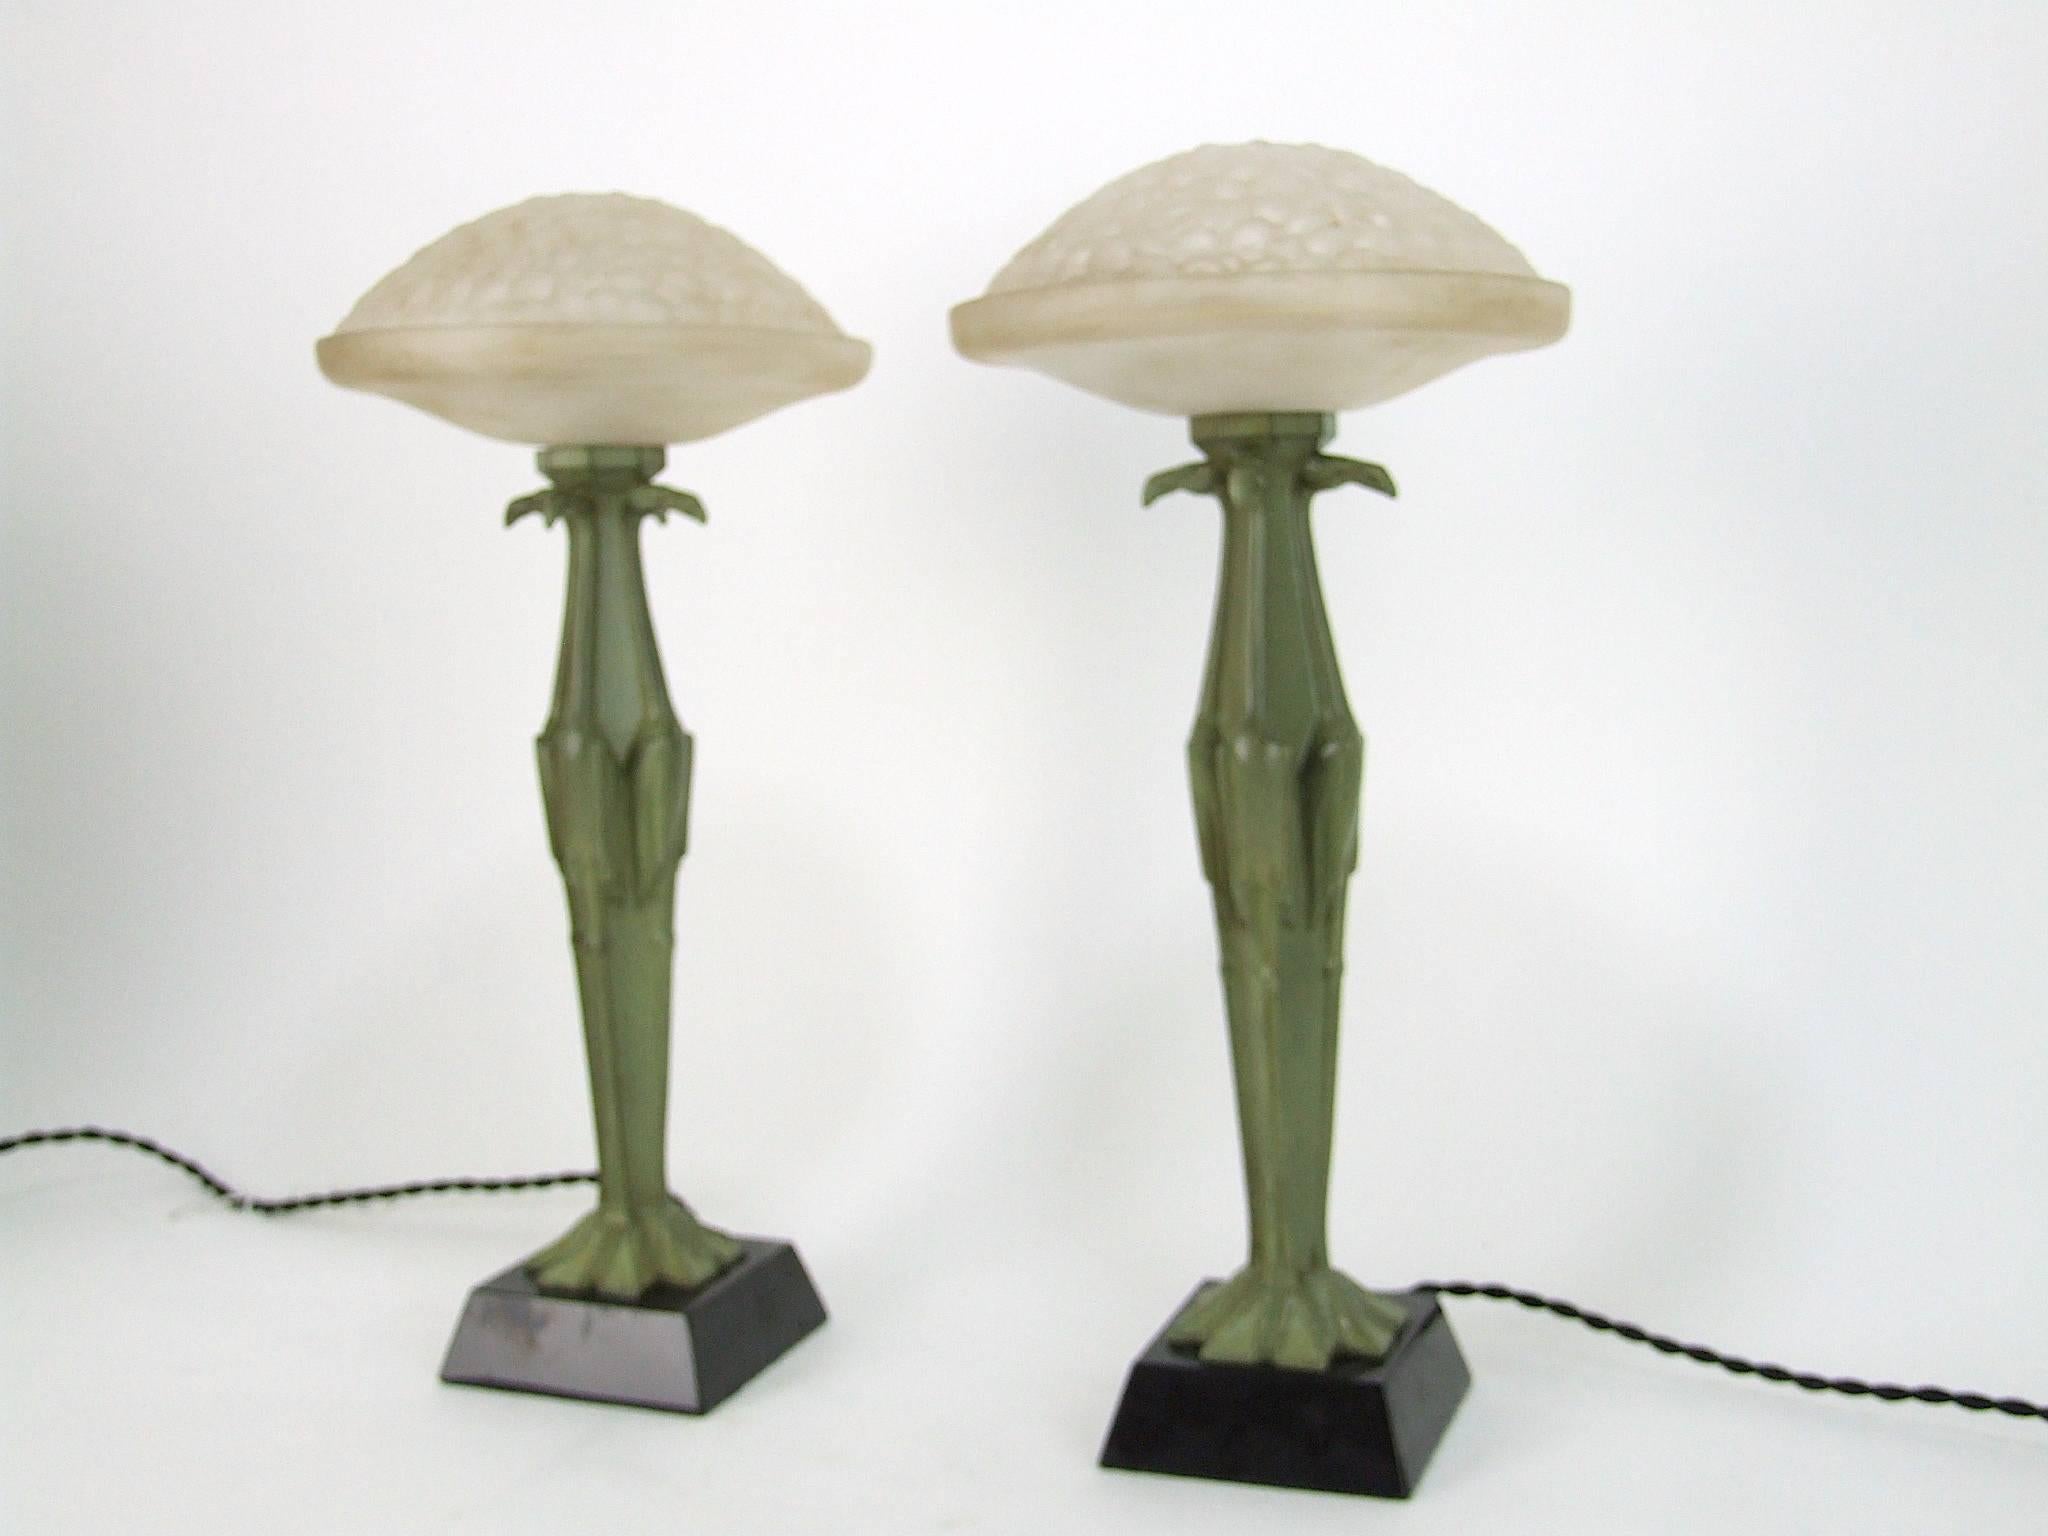 A pair of original French Art Deco cubist flamingo table lamps in green patinated spelter by Max Le Verrier. Stamped to the base metal Le Verrier and stamped with the foundry stamp. The glass shades are in two parts, the bottom part is fixed to the